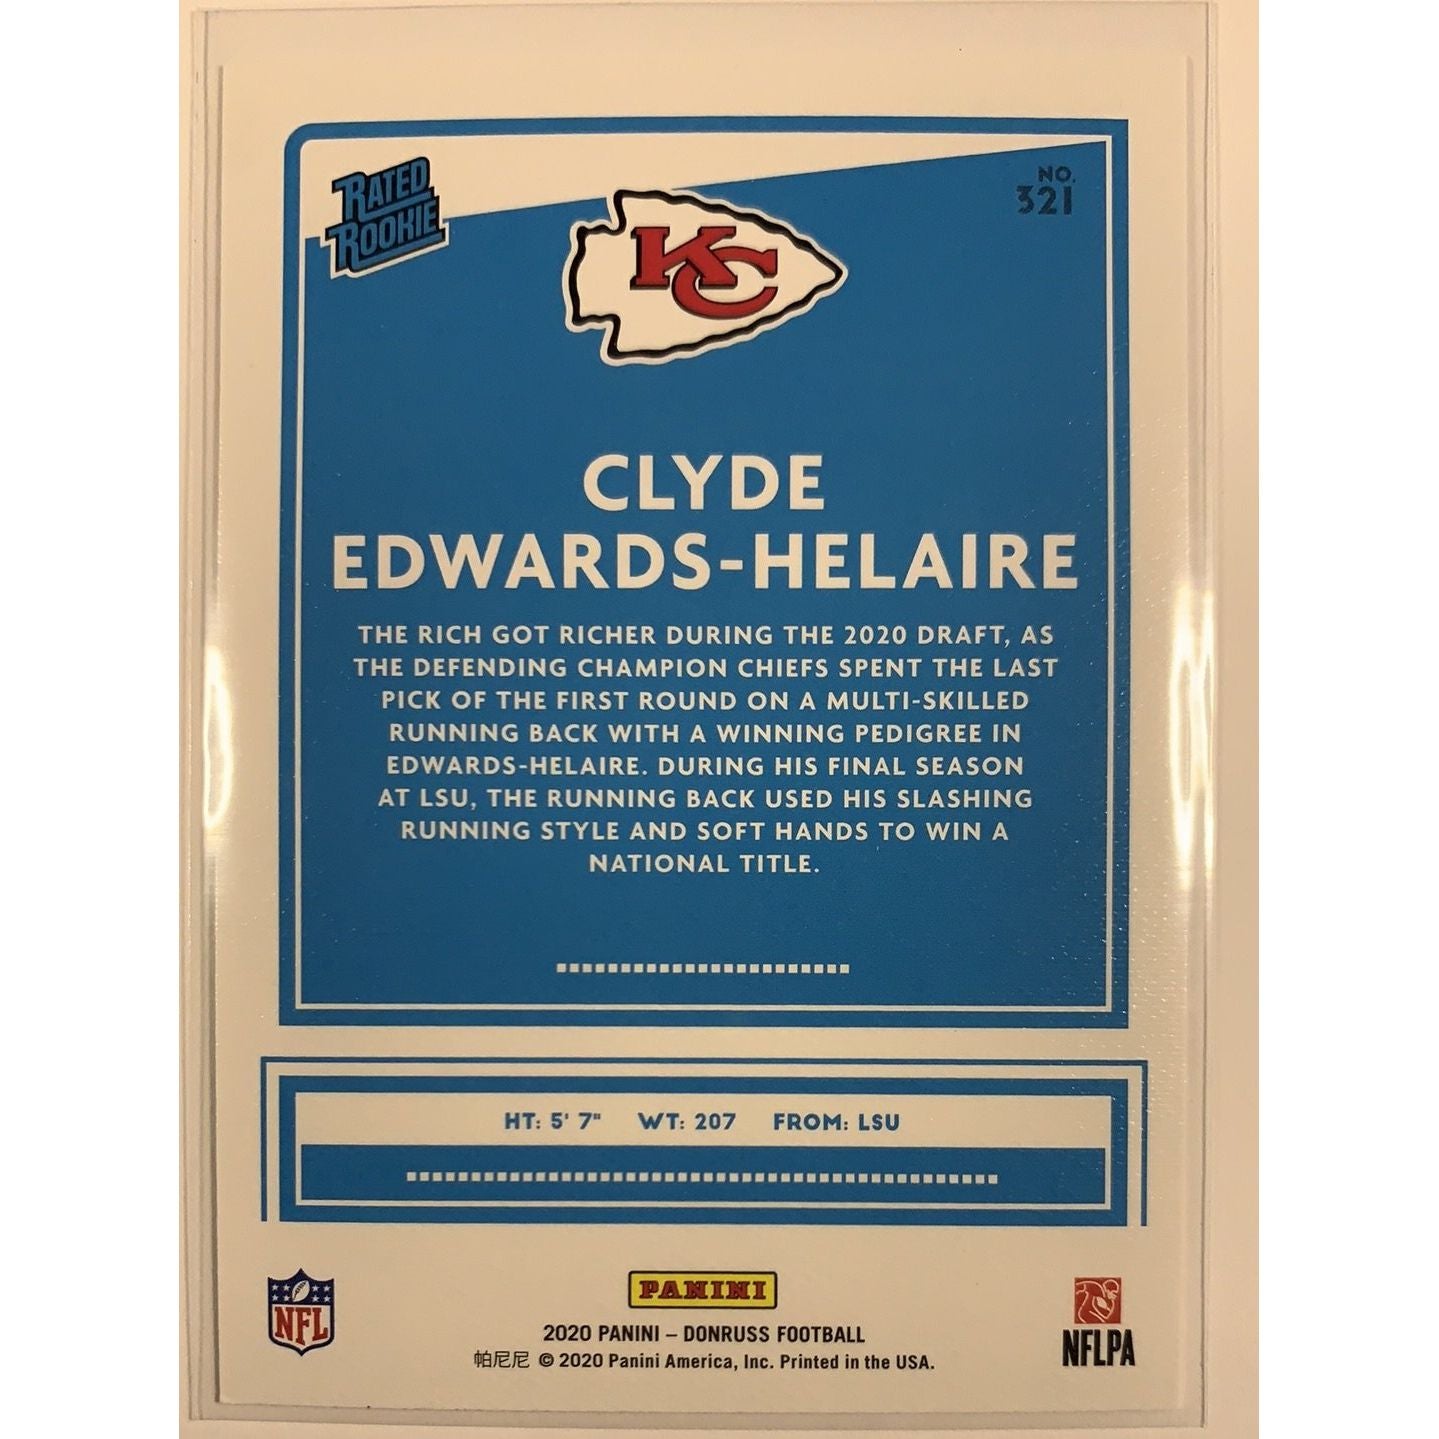  2020 Donruss Clyde Edwards-Helaire Canvas Rated Rookie  Local Legends Cards & Collectibles